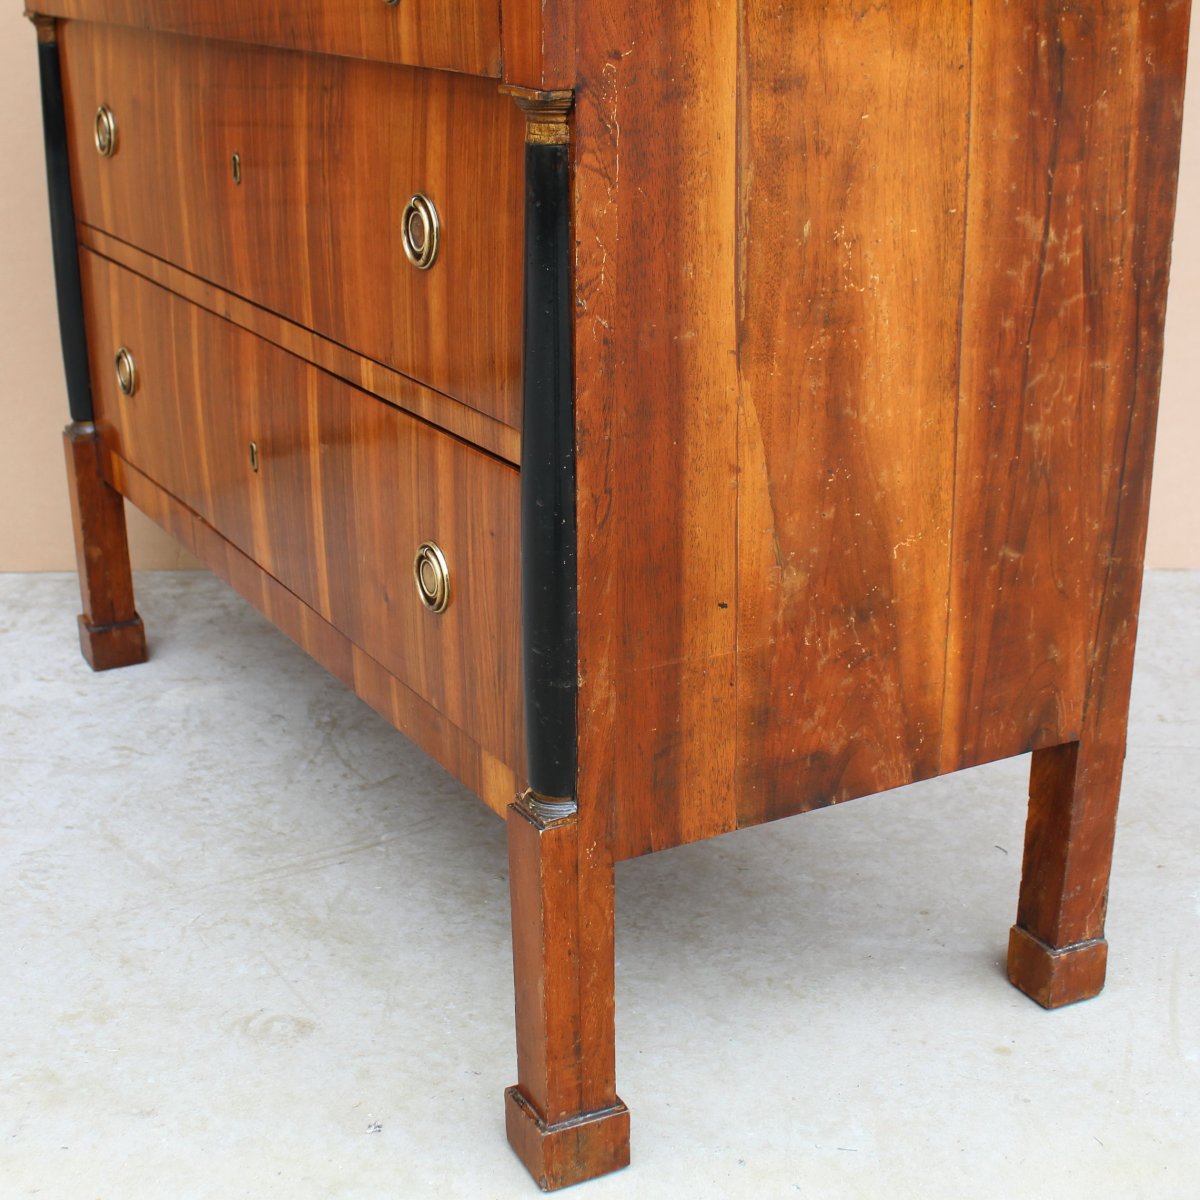 Antique Empire Dresser Commode Chest Of Drawers In Walnut - Italy 19th Century-photo-7